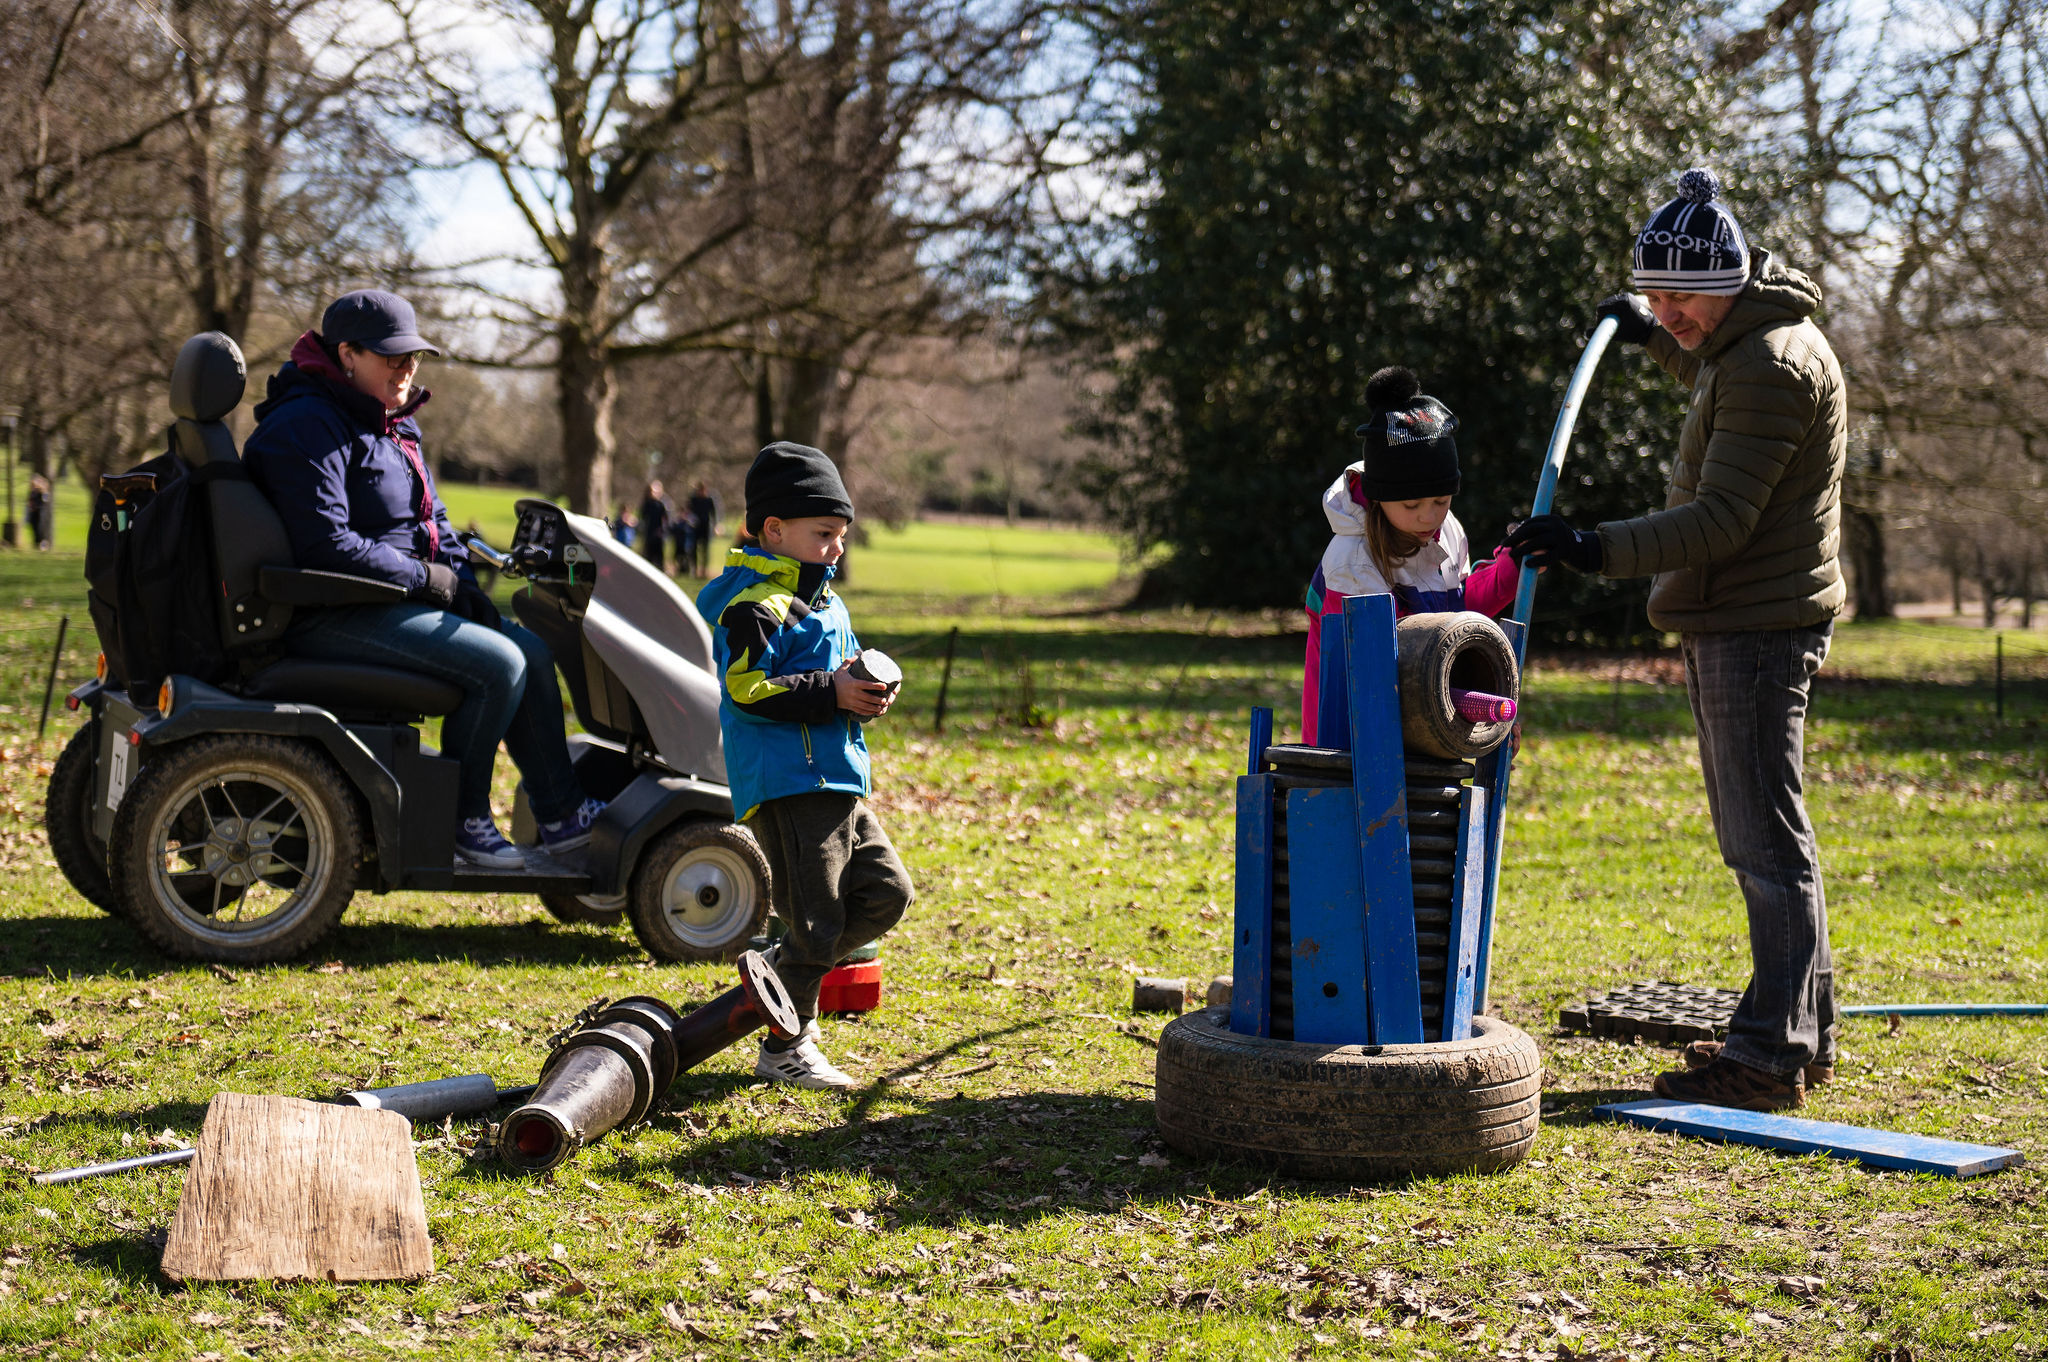 A family of 2 adults and 2 children building sculptures out of typers and plastic pipes. One of the adults is using a tramper mobility scooter.